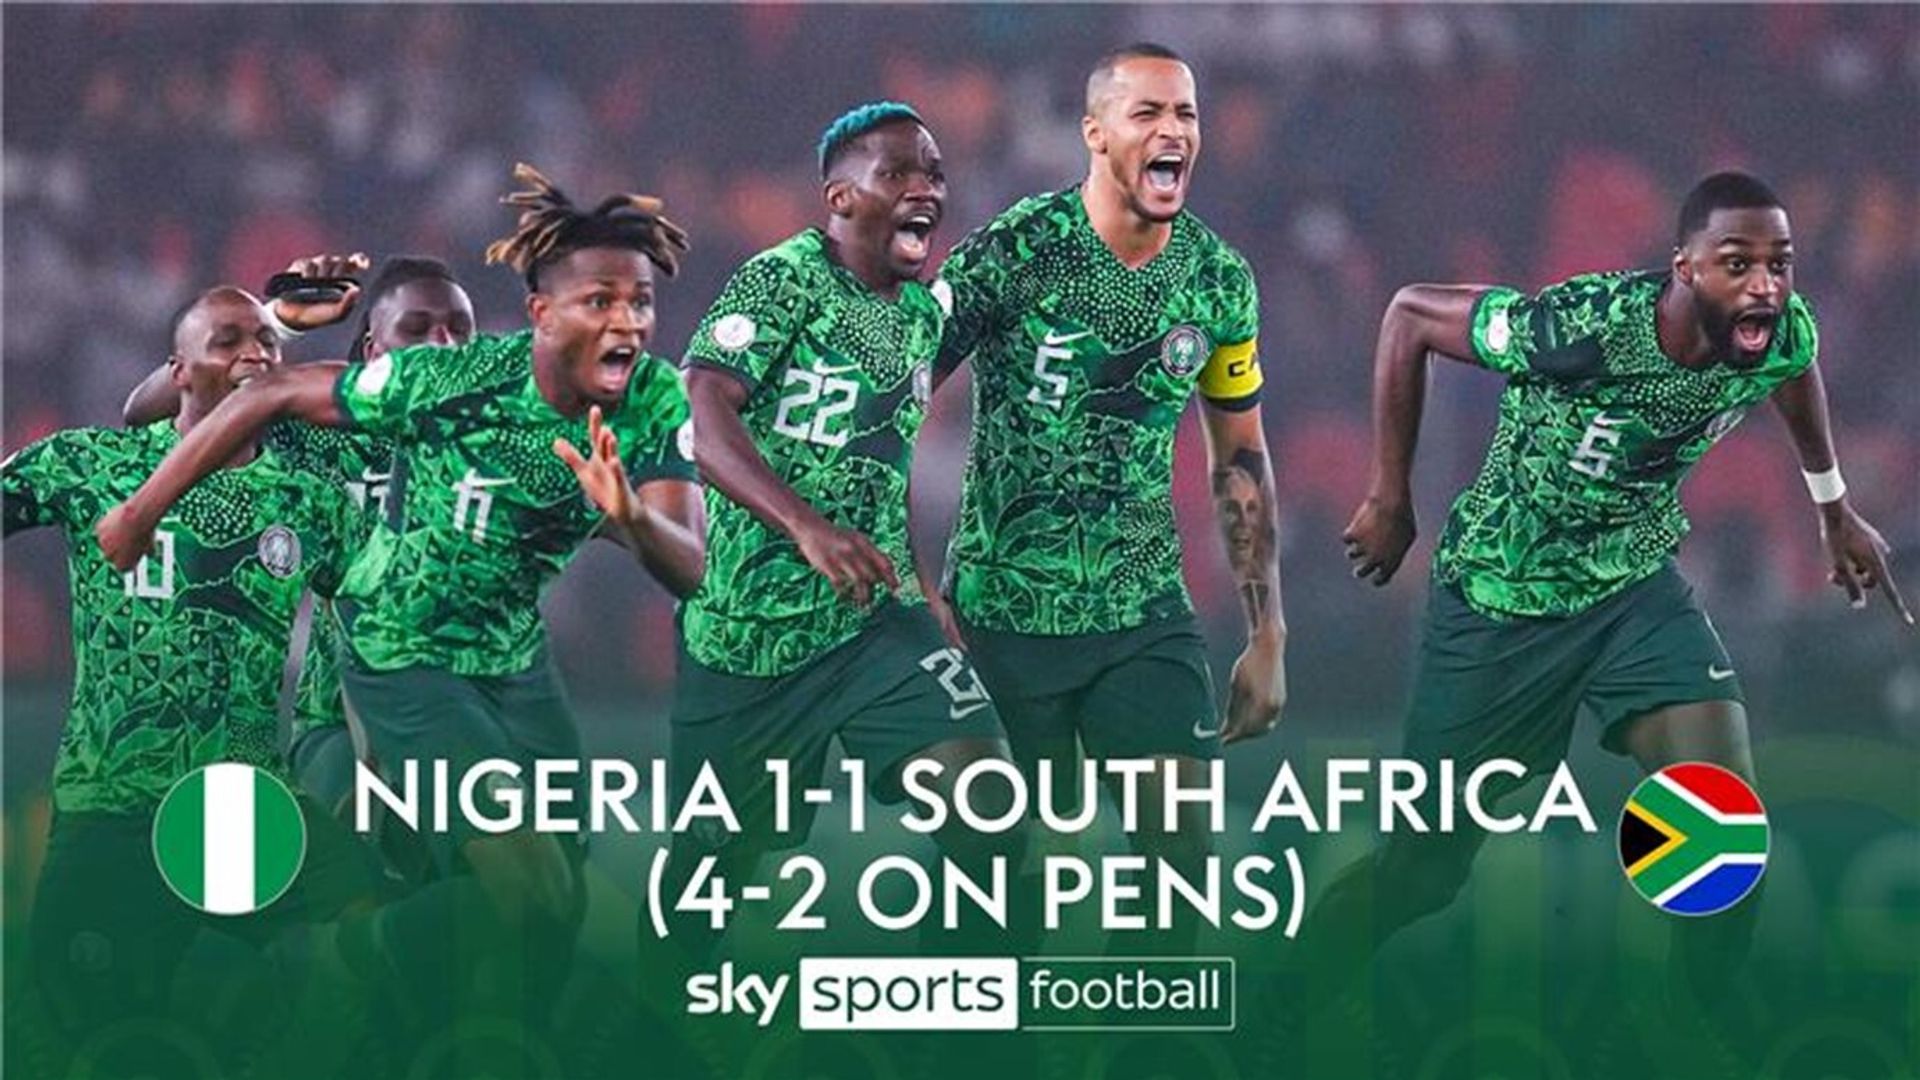 Nigeria book spot in AFCON final after late drama leads to penalties